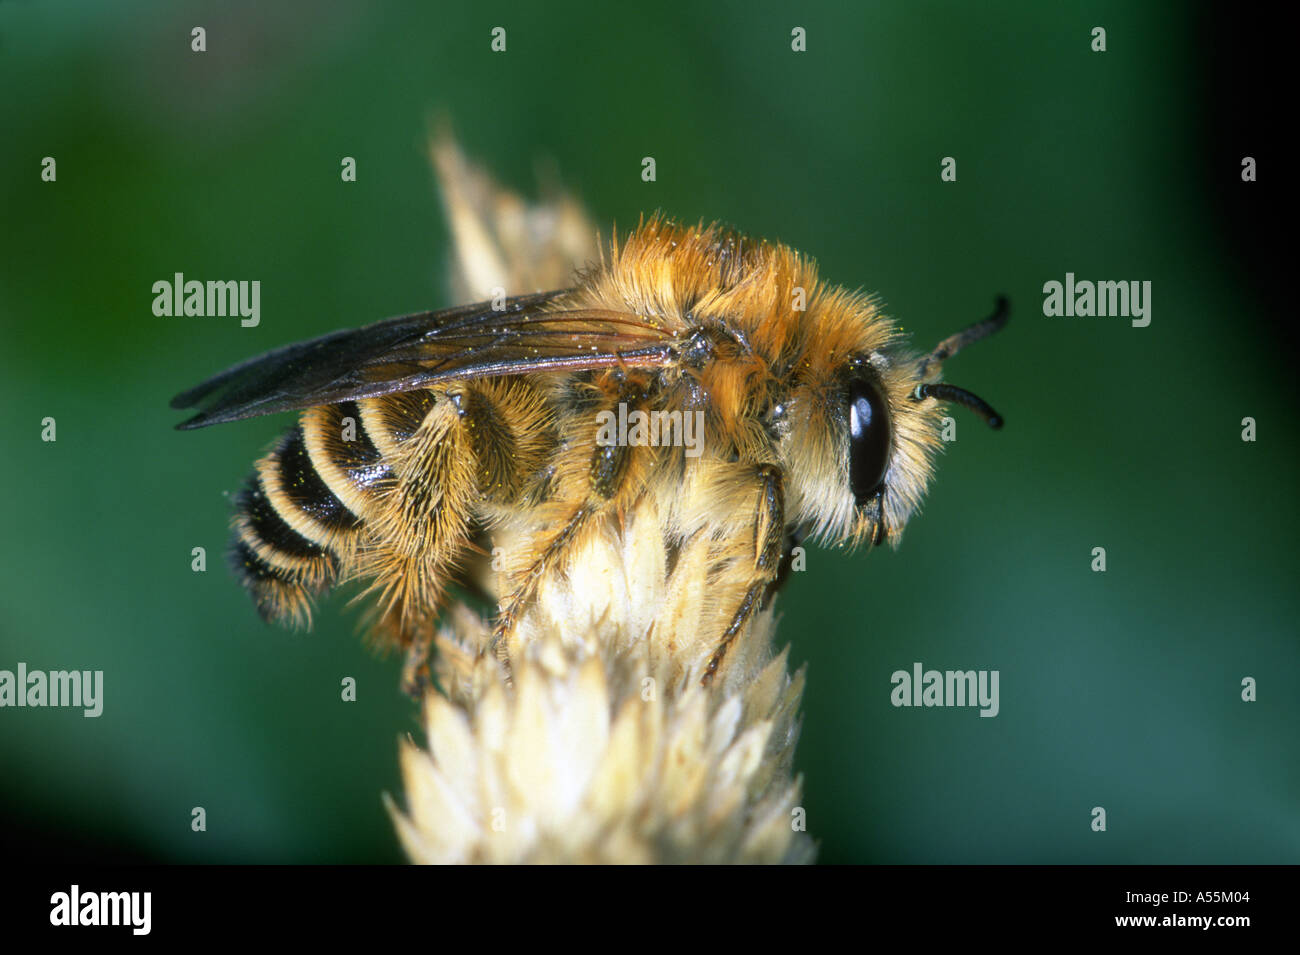 Bee, Dasypoda sp. at rest on plant Stock Photo